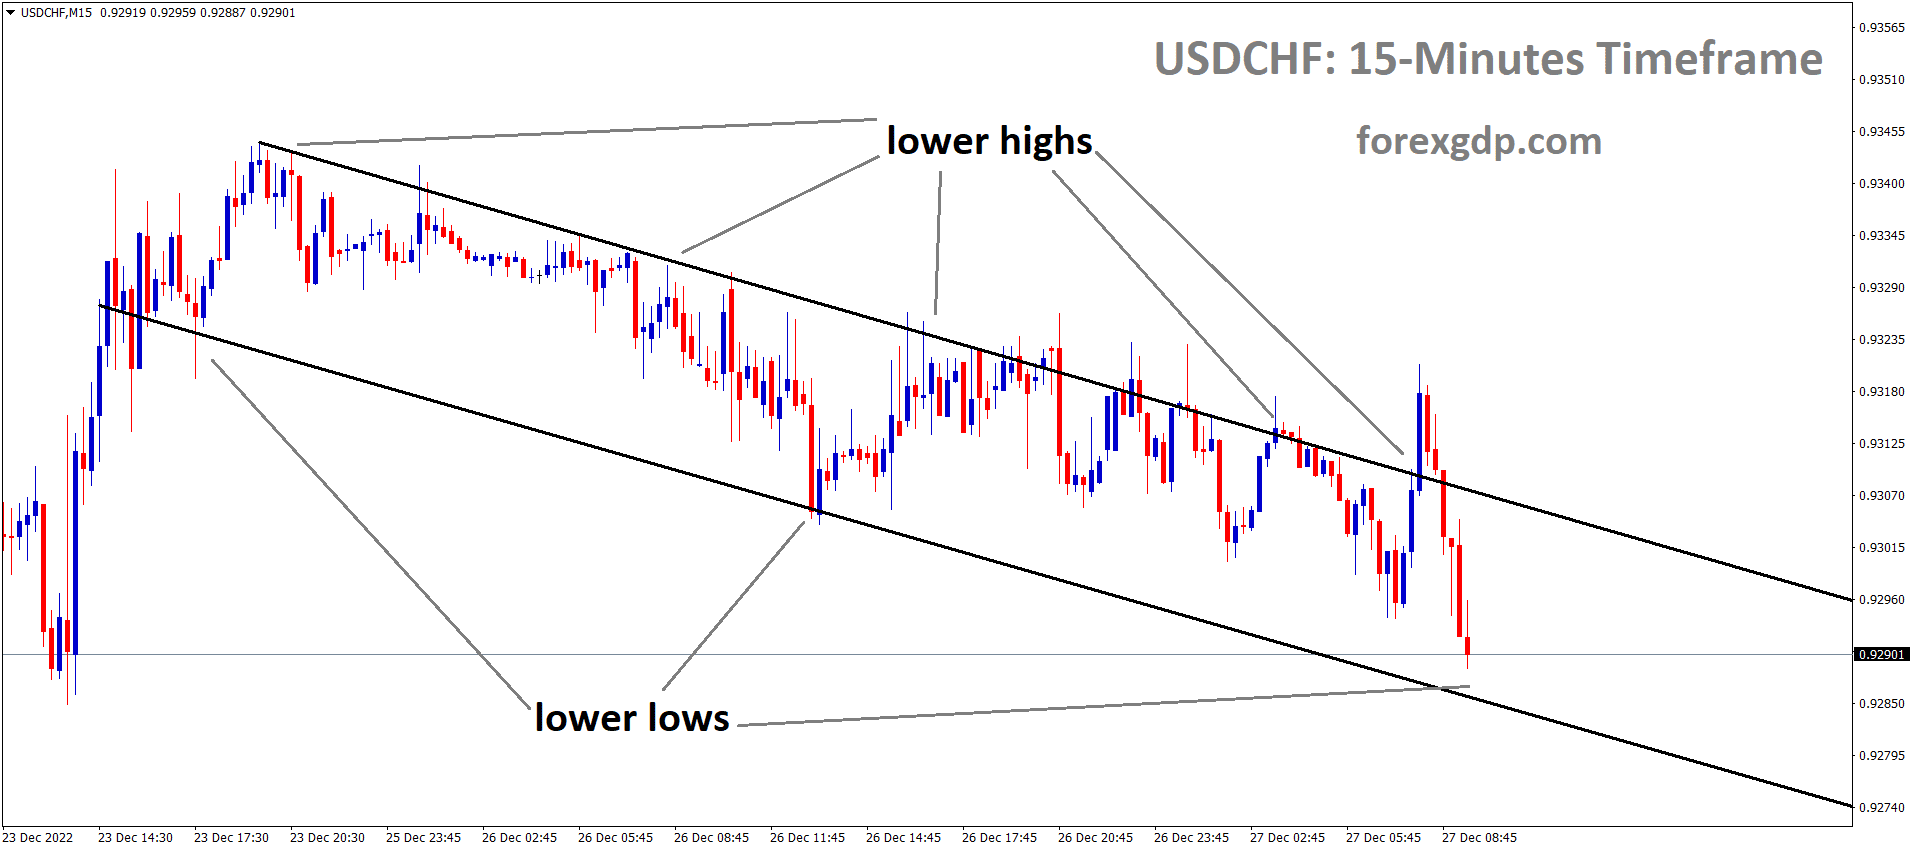 USDCHF is moving in the Descending channel and the market has reached the lower low area of the channel 3